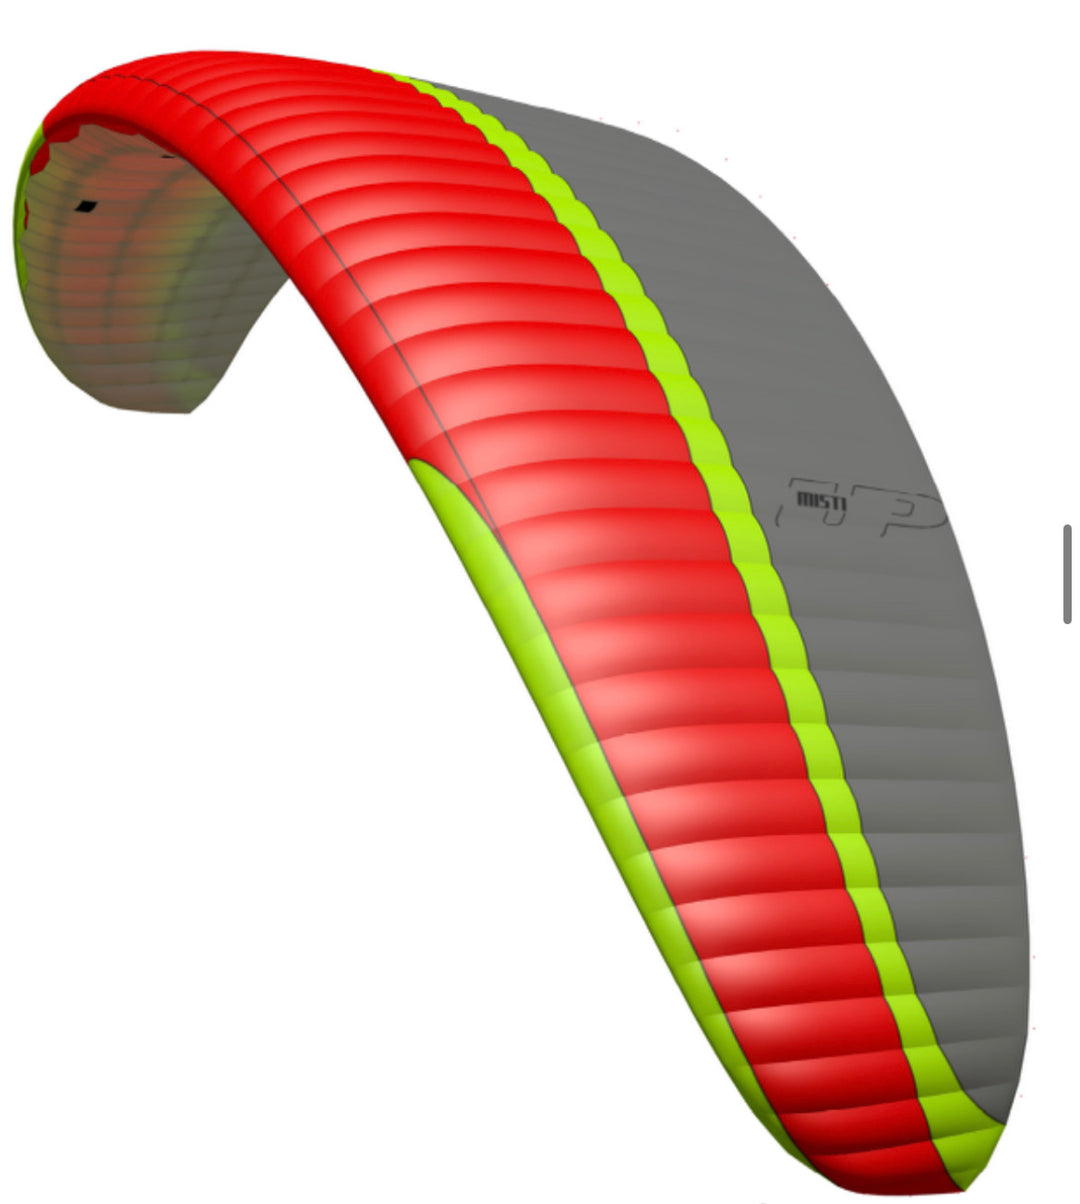 UP Misti paragliding wing grey red